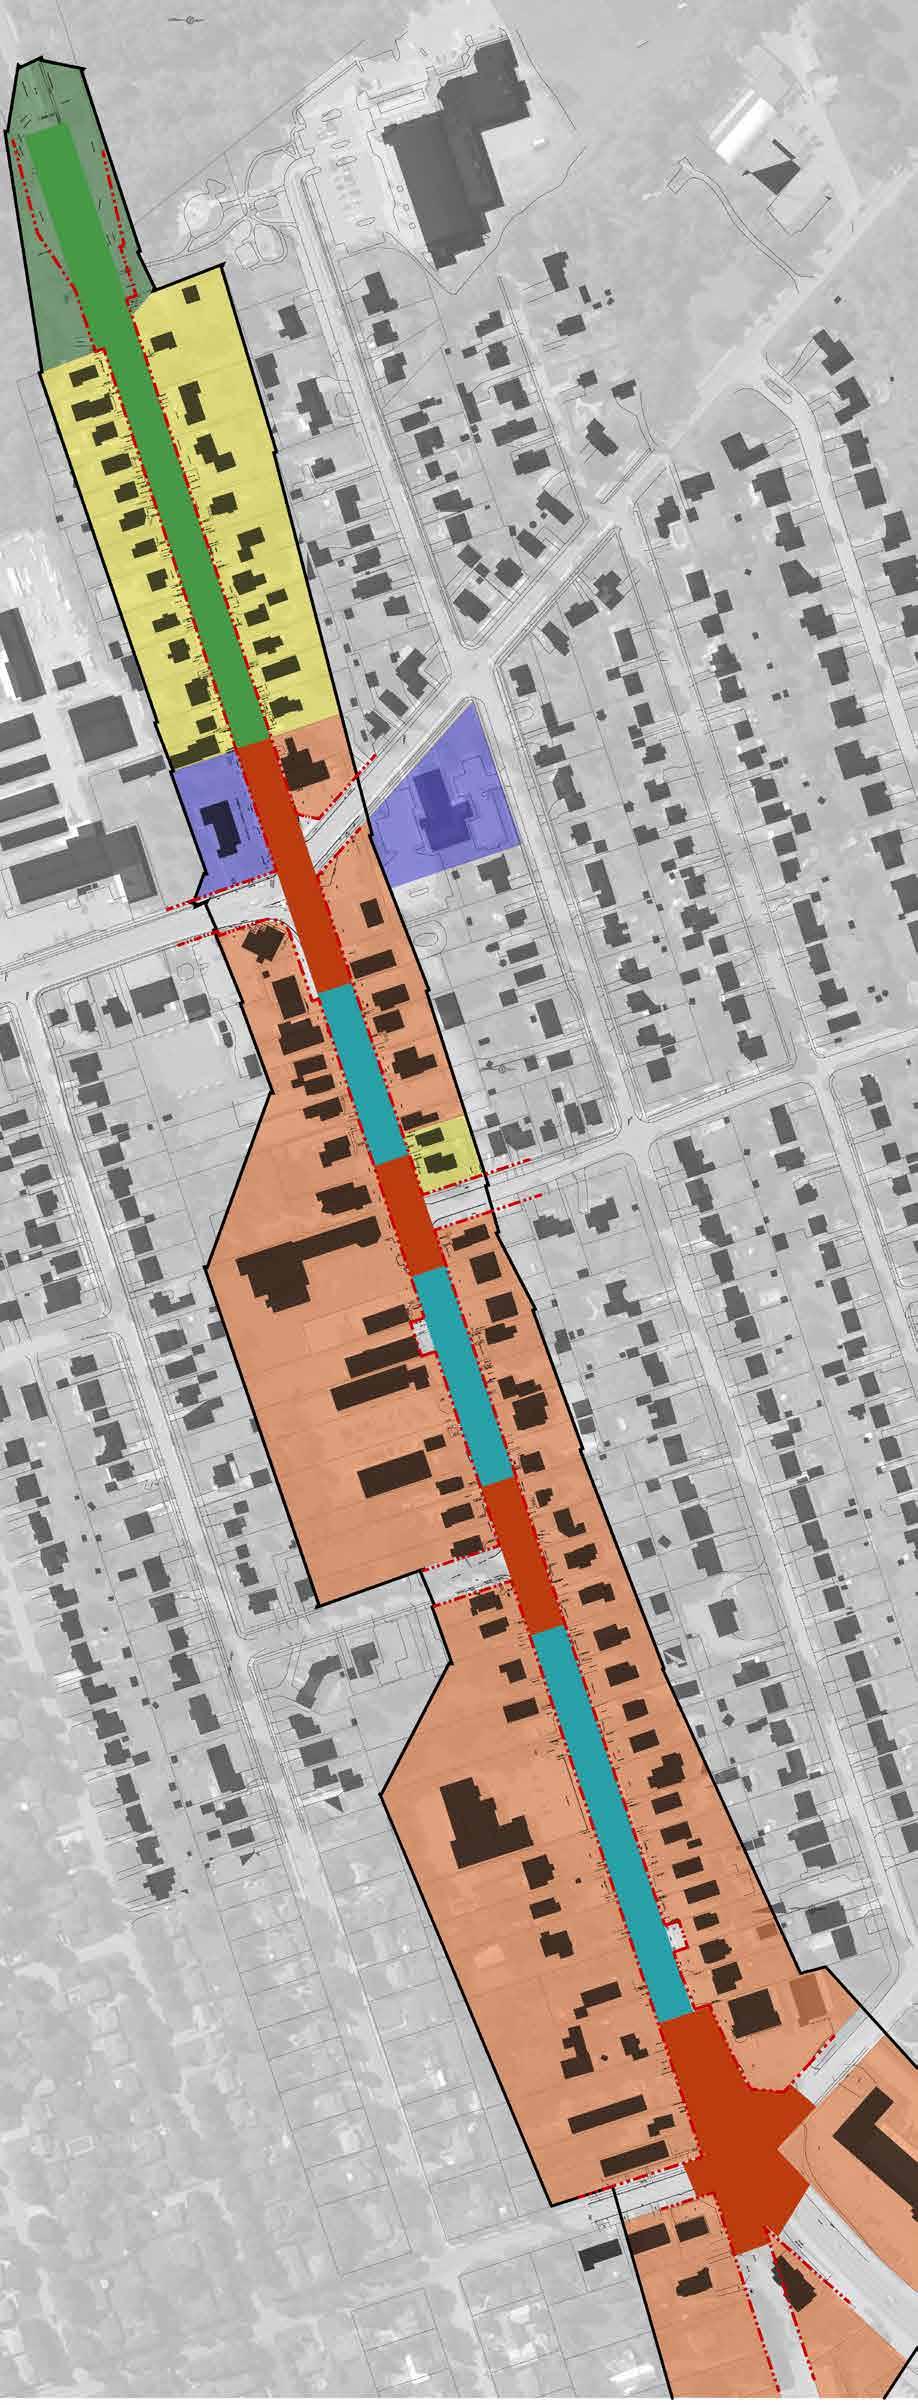 Design Approach Campbell Street Colonel Talbot Rd STREETSCAPE TYPOLOGY Main Street Midblock Treatment with Lay-by Parking Permanent Intersection Treatment Lower Density Midblock Treatment LAND USE